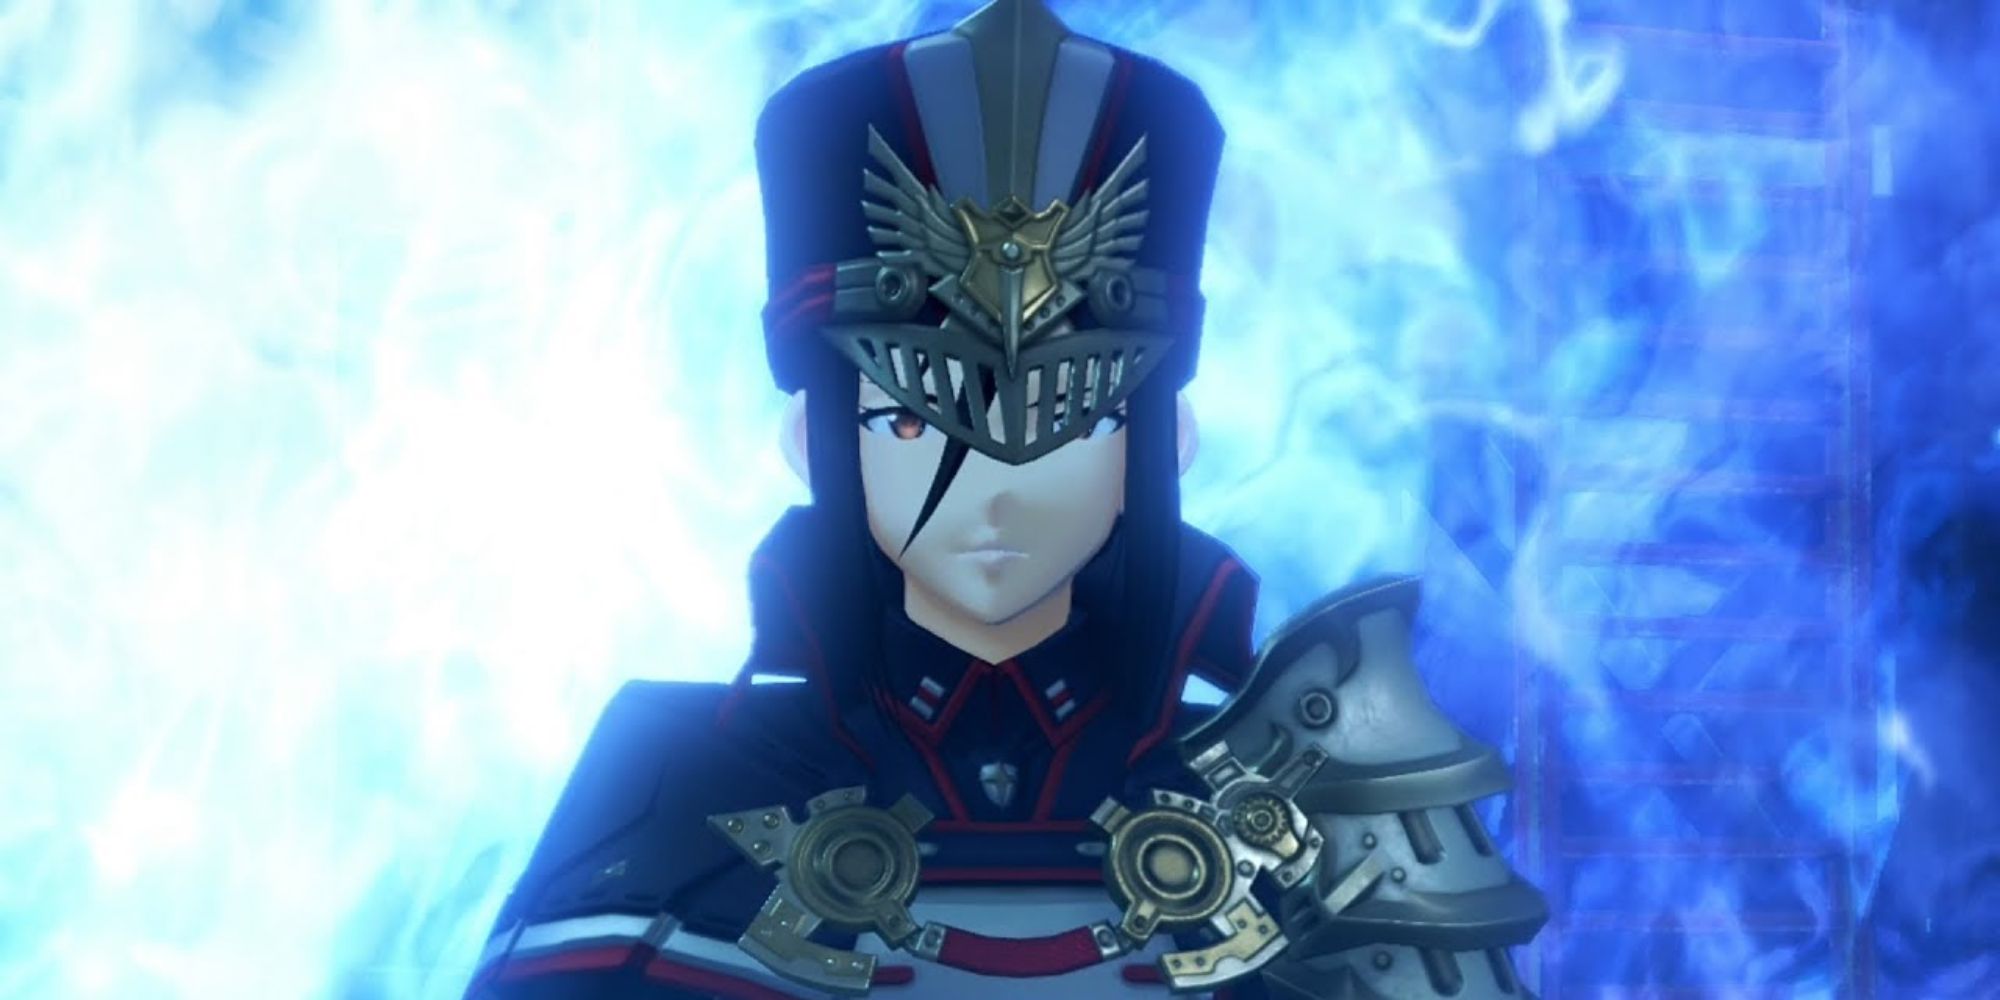 Xenoblade Chronicles 2 Characters Morag standing proudly in her blue uniform with blue flames spreading out behind her